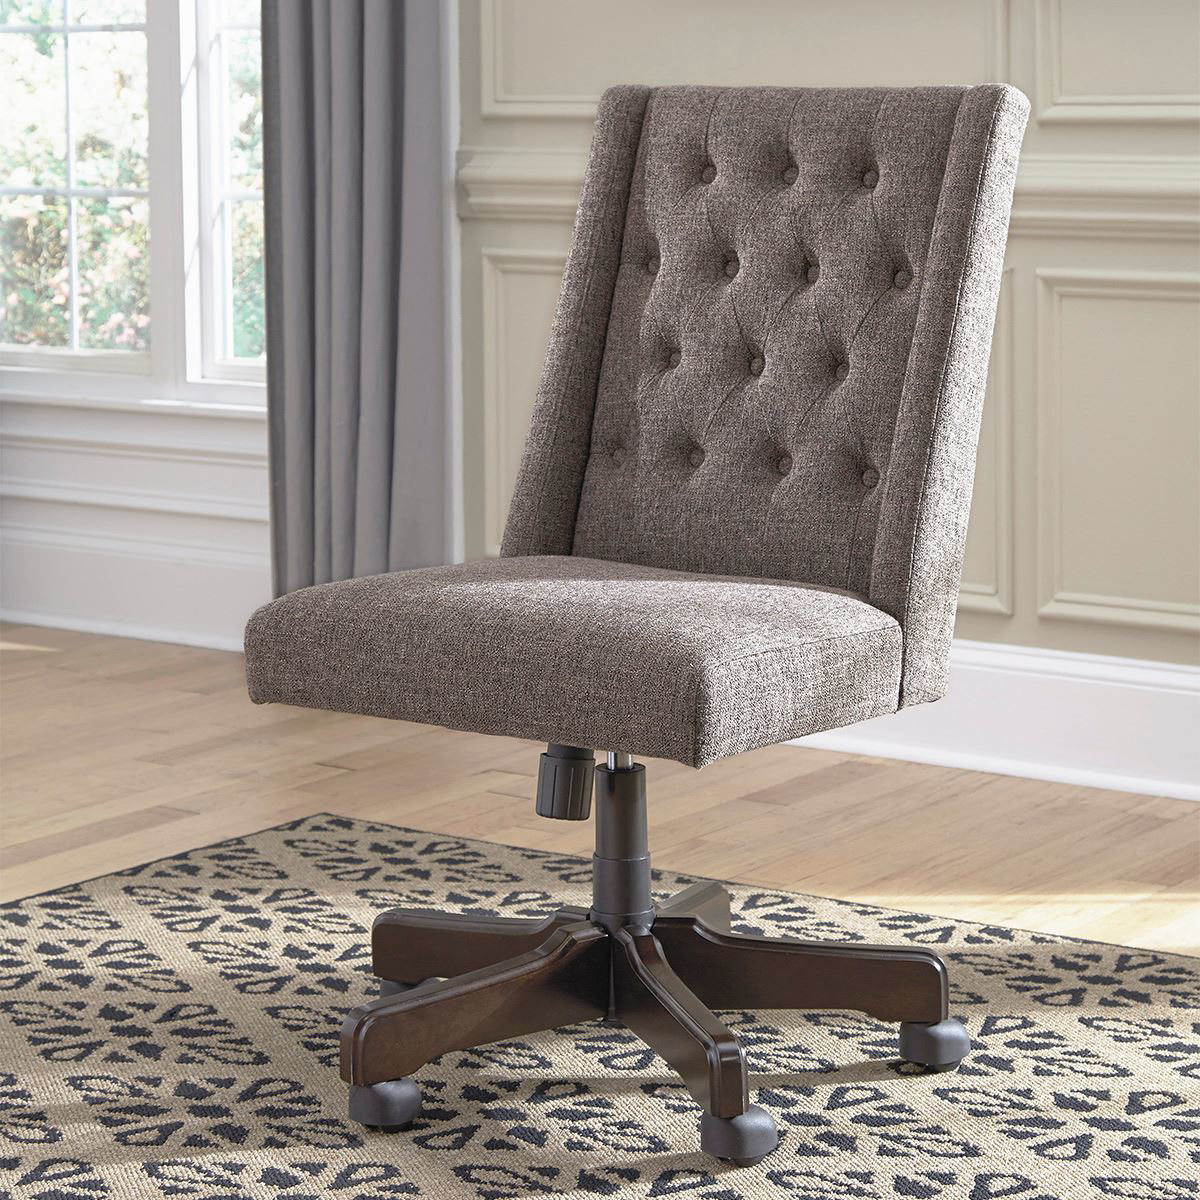 Picture of Grey Tufted Desk Chair